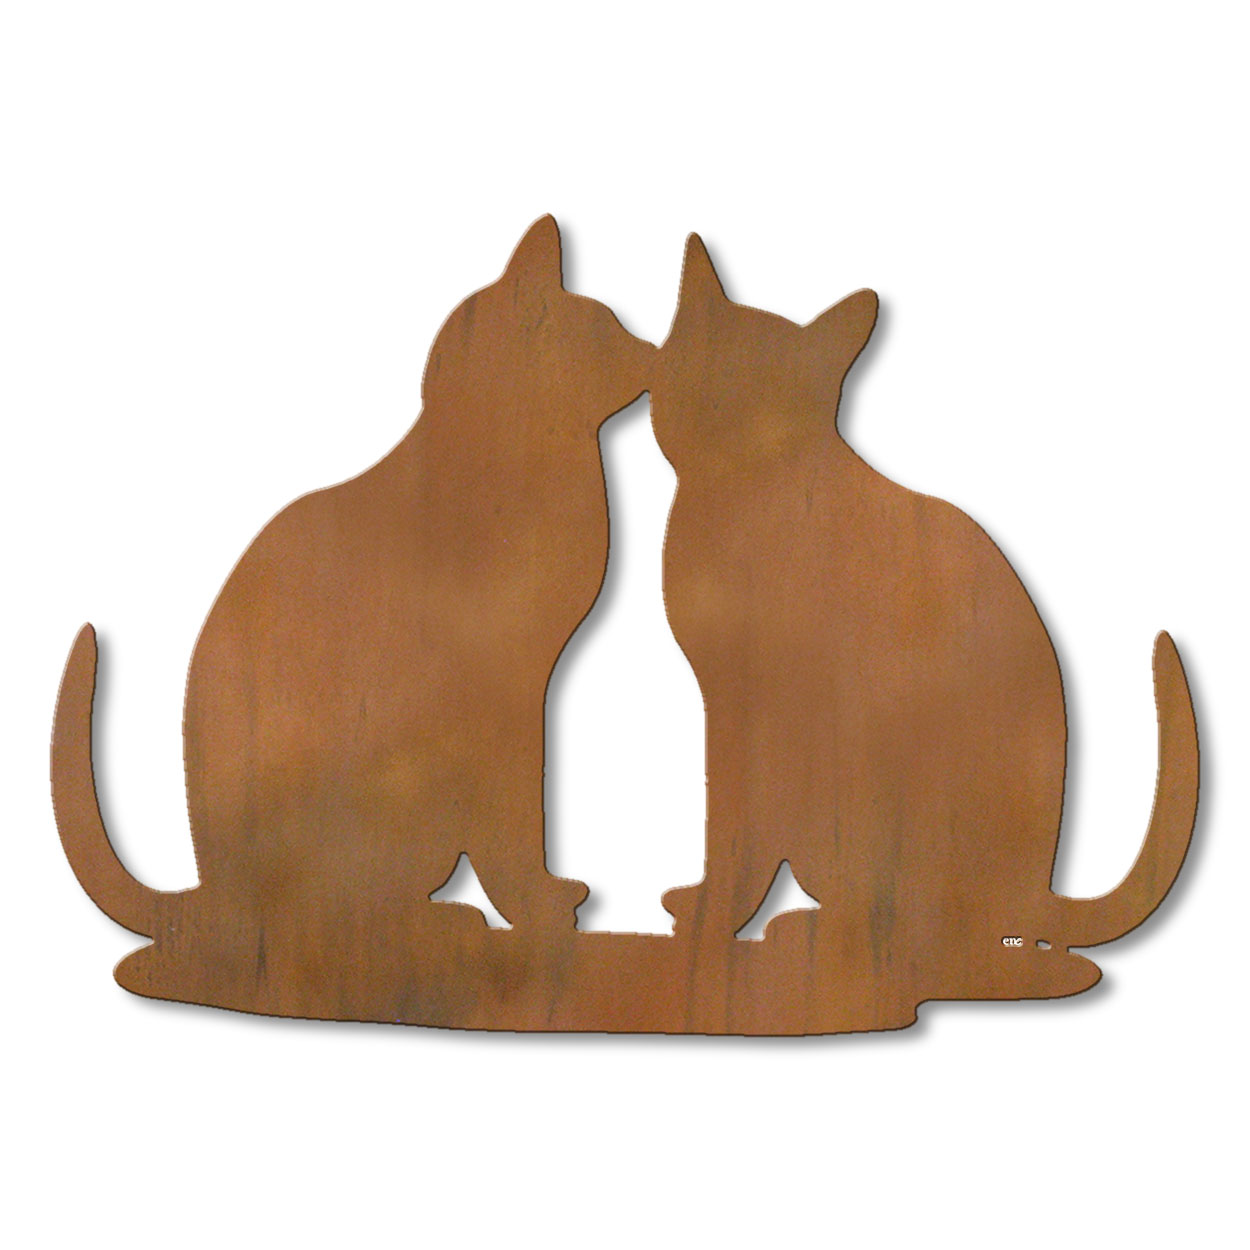 625453r - 18 or 24in Metal Wall Art - Two Cats - Rust Patina